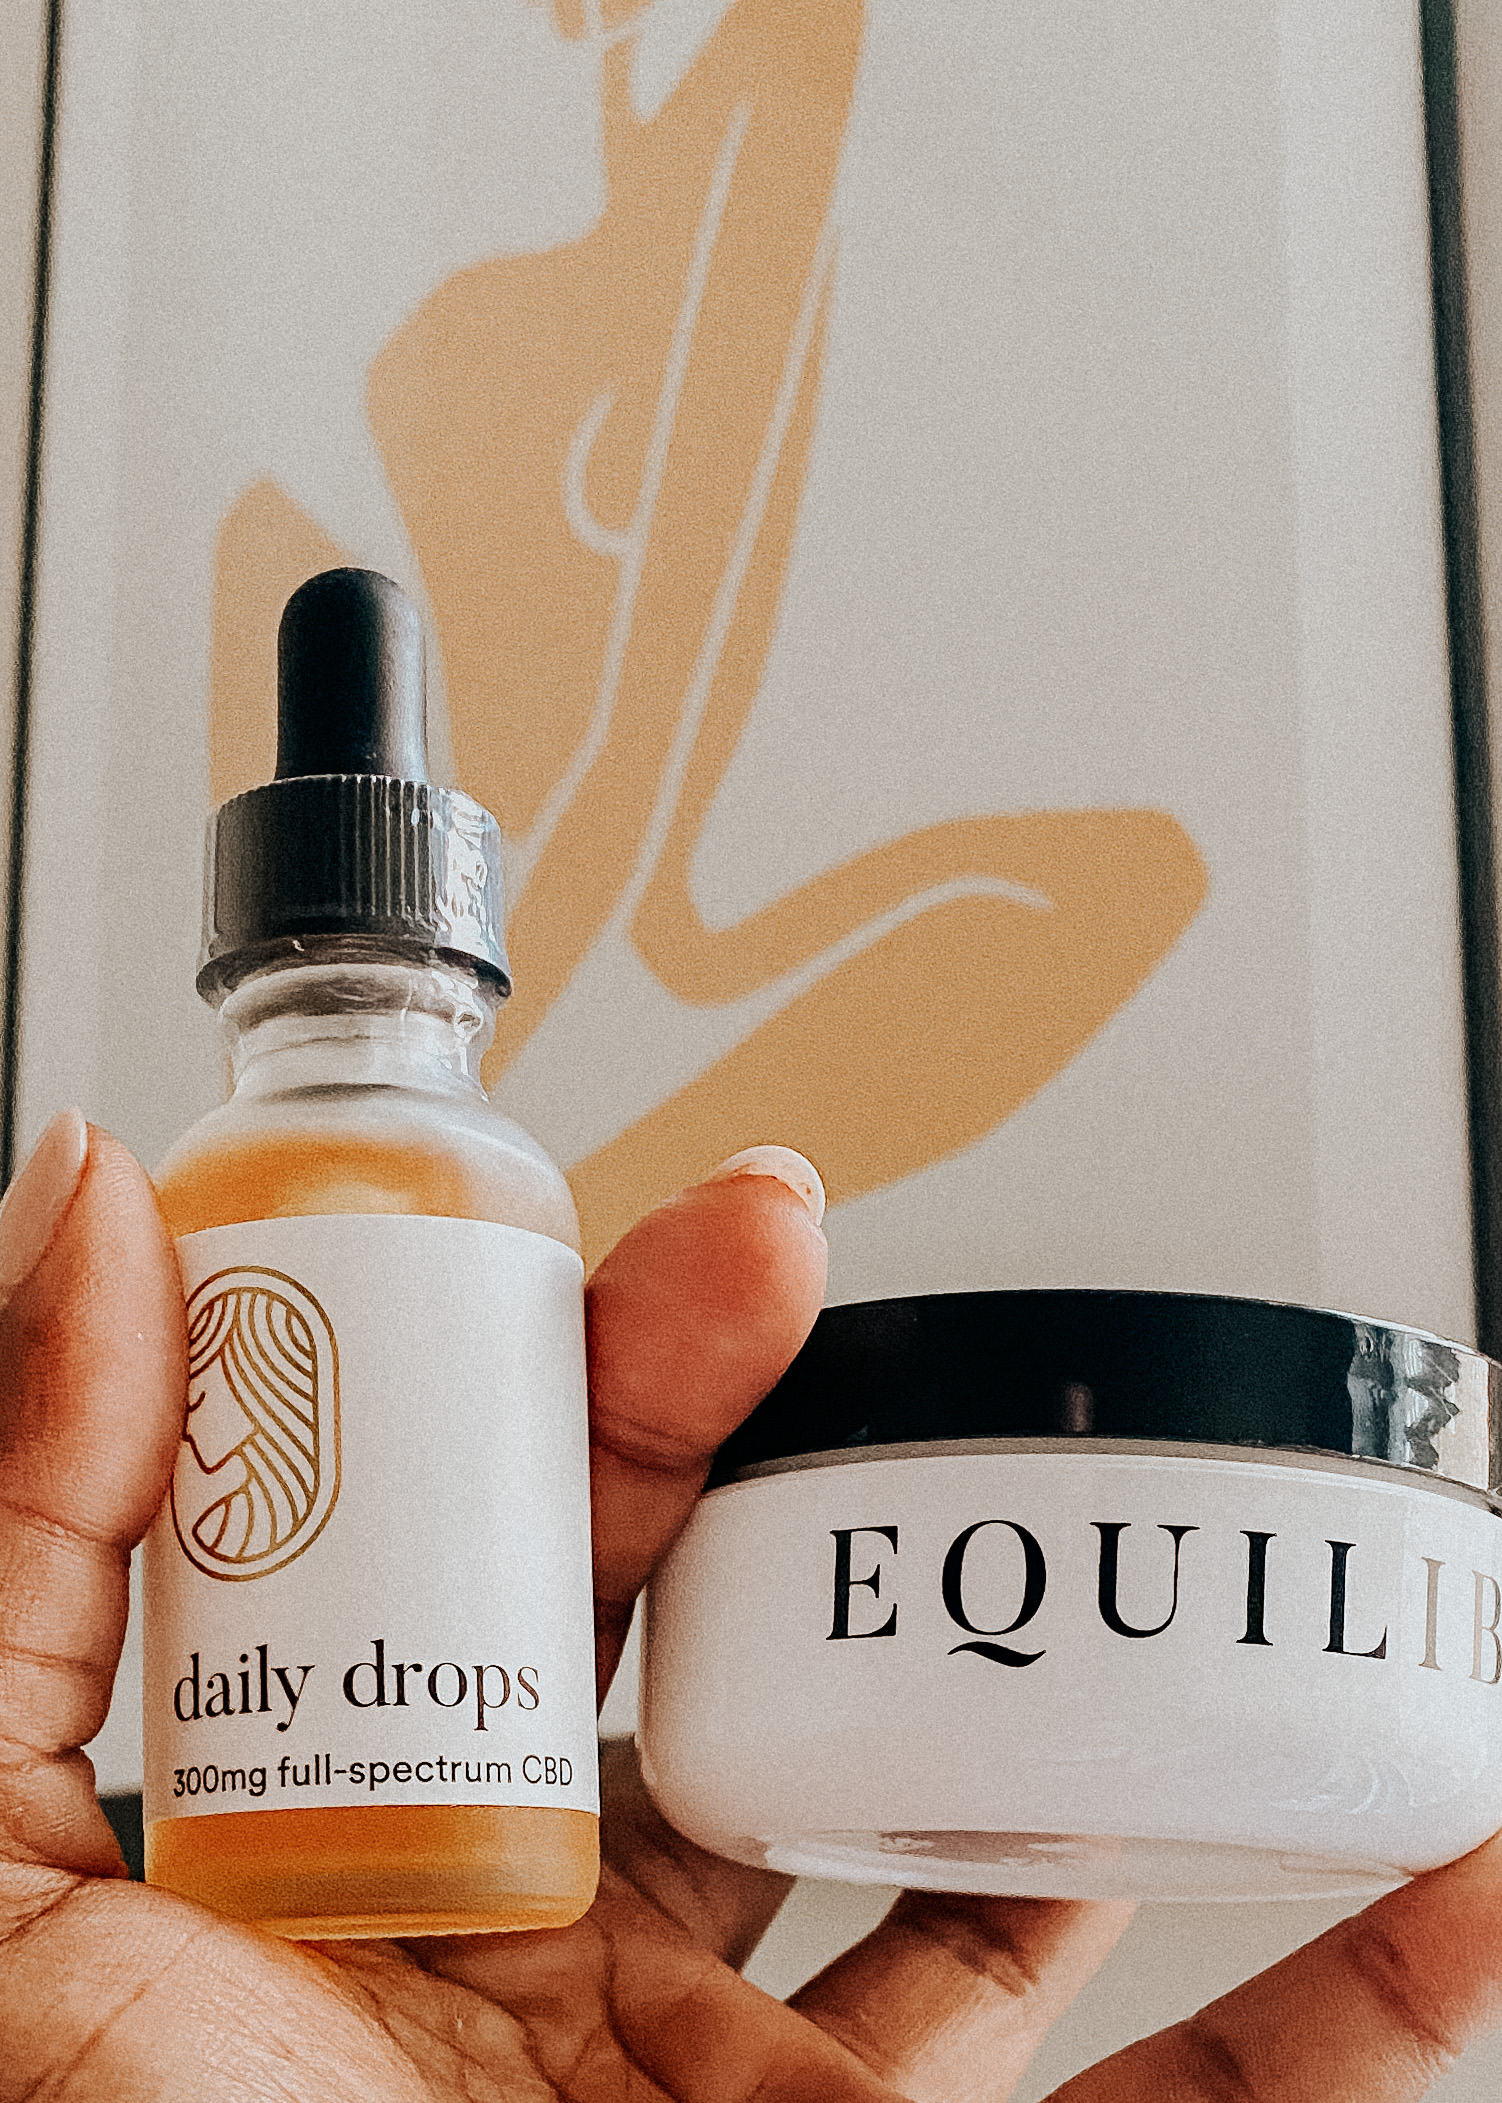 All About My CBD Oil Journey